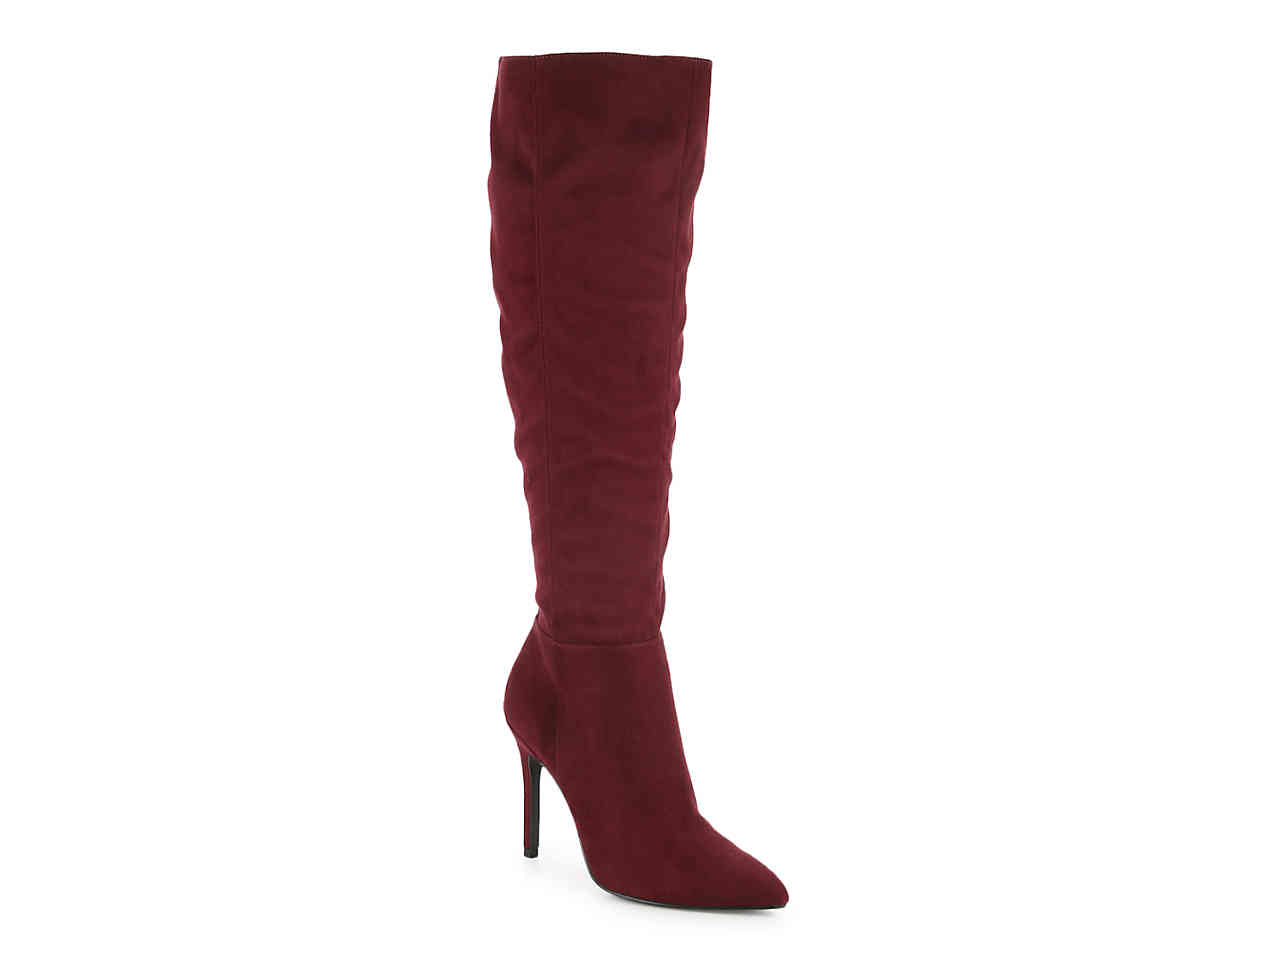 12 Stylish Plus Size Wide Calf Boots That Aren't Frumpy